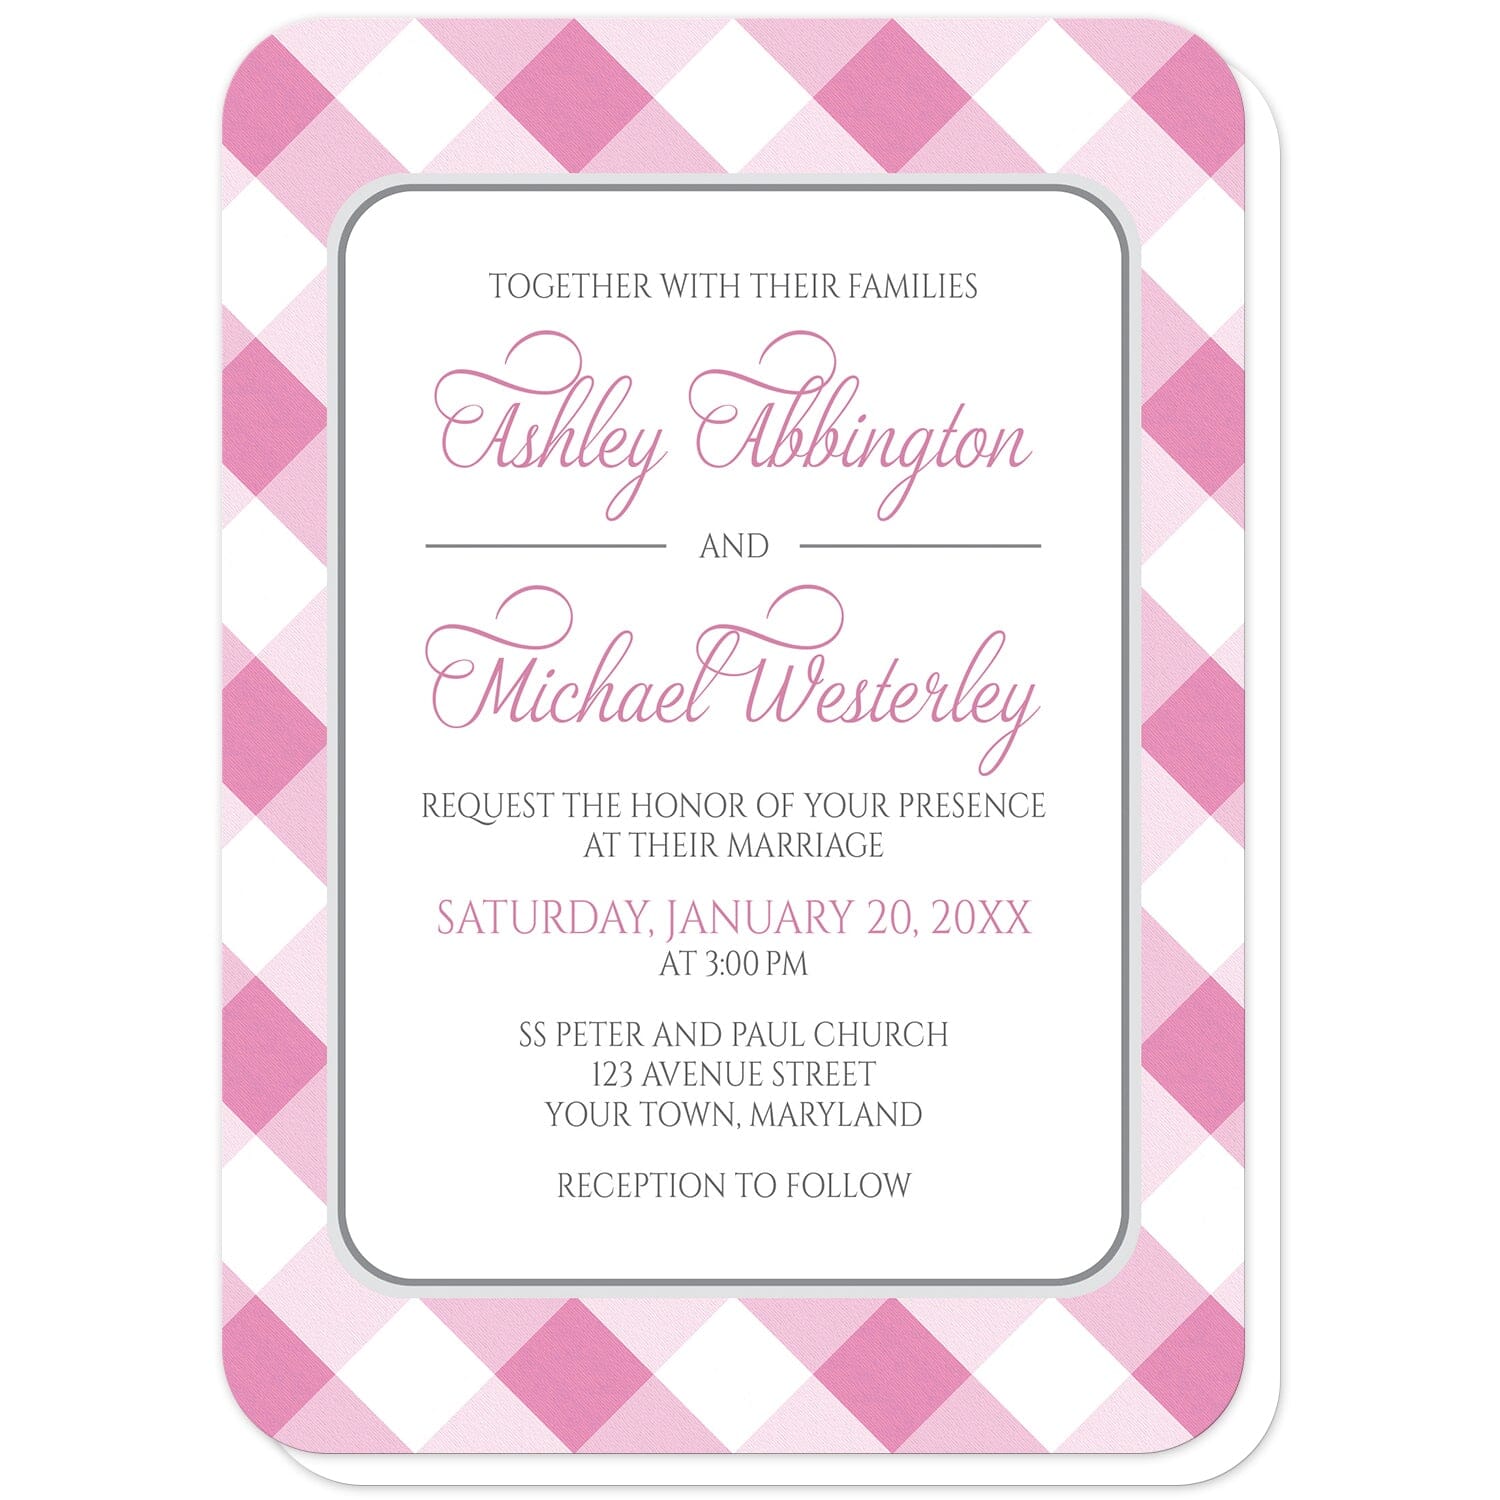 Pink Gingham Wedding Invitations (with rounded corners) at Artistically Invited. Pink gingham wedding invitations with your personalized wedding ceremony details custom printed in pink and gray inside a white rectangular area outlined in gray. The background design is a diagonal pink and white gingham check pattern. 